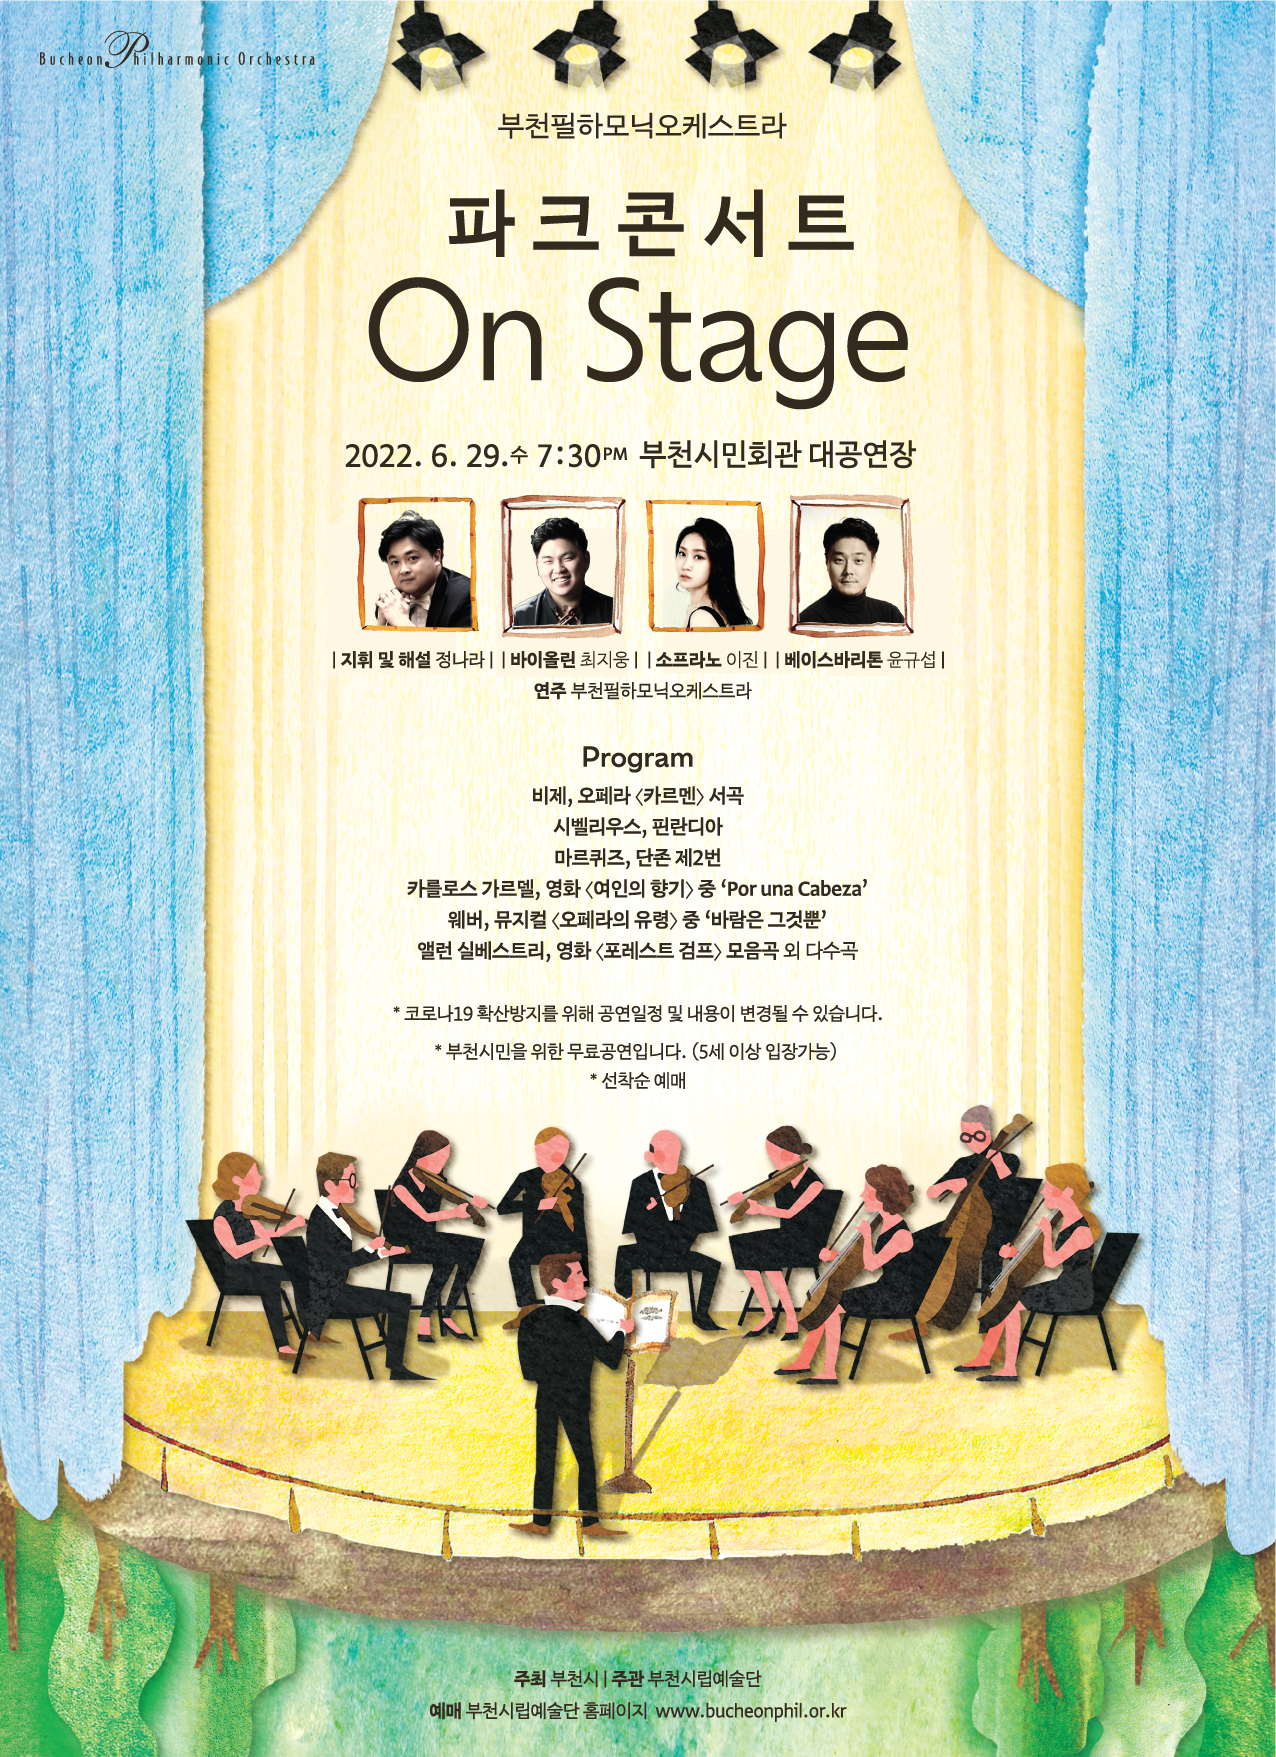 [6.29]Bucheon Philharmonic Orchestra Special Concert - Park Concert on Stage